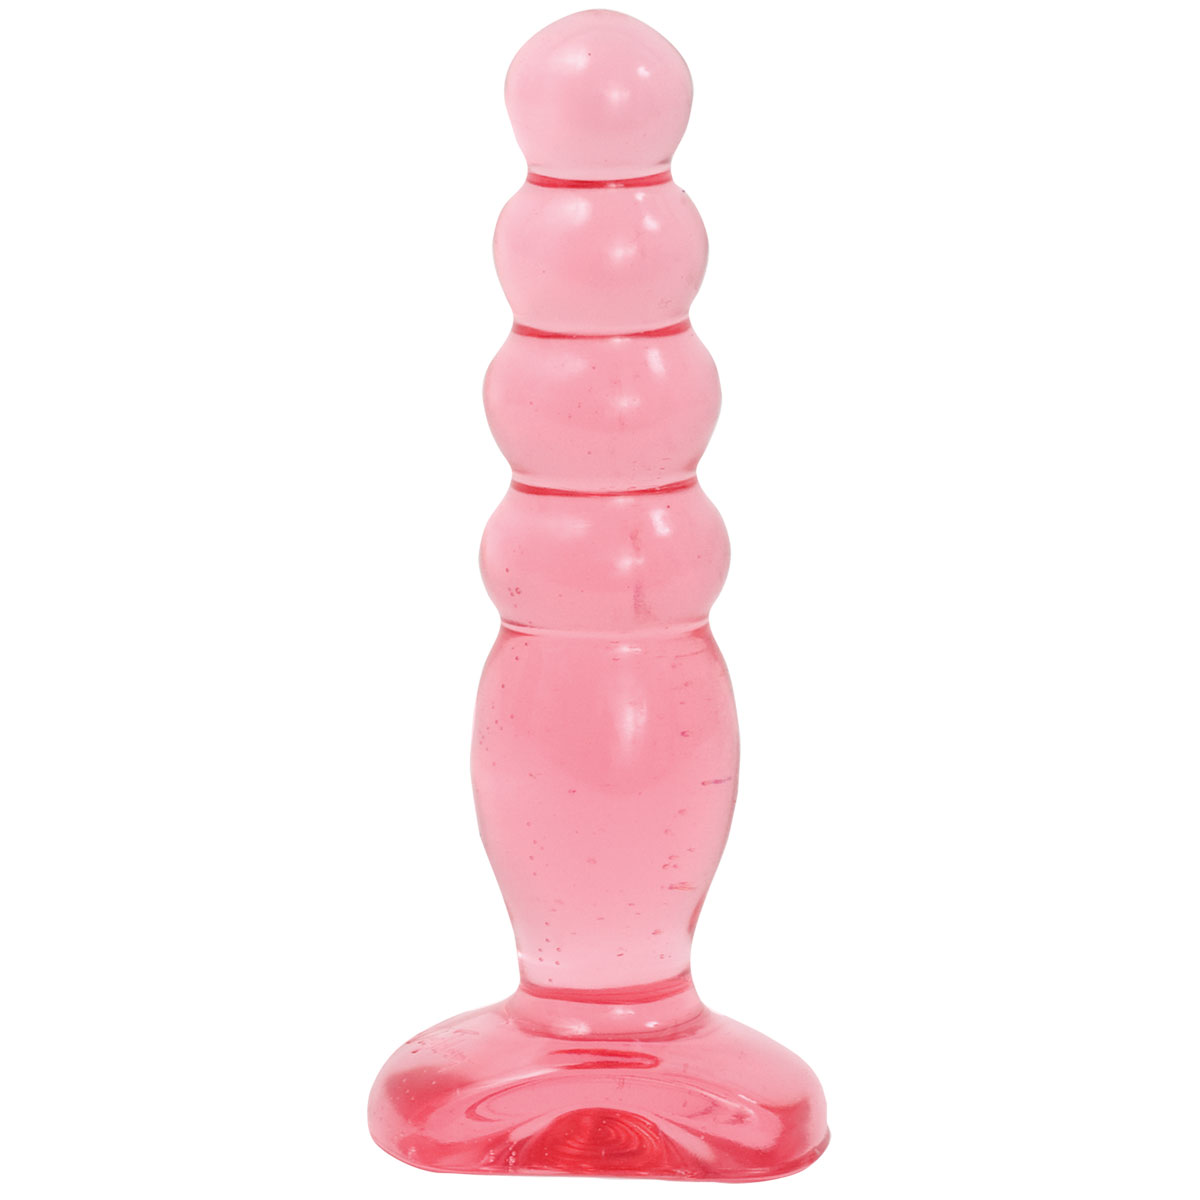    Crystal Jellies 5  Anal Delight - 14 .